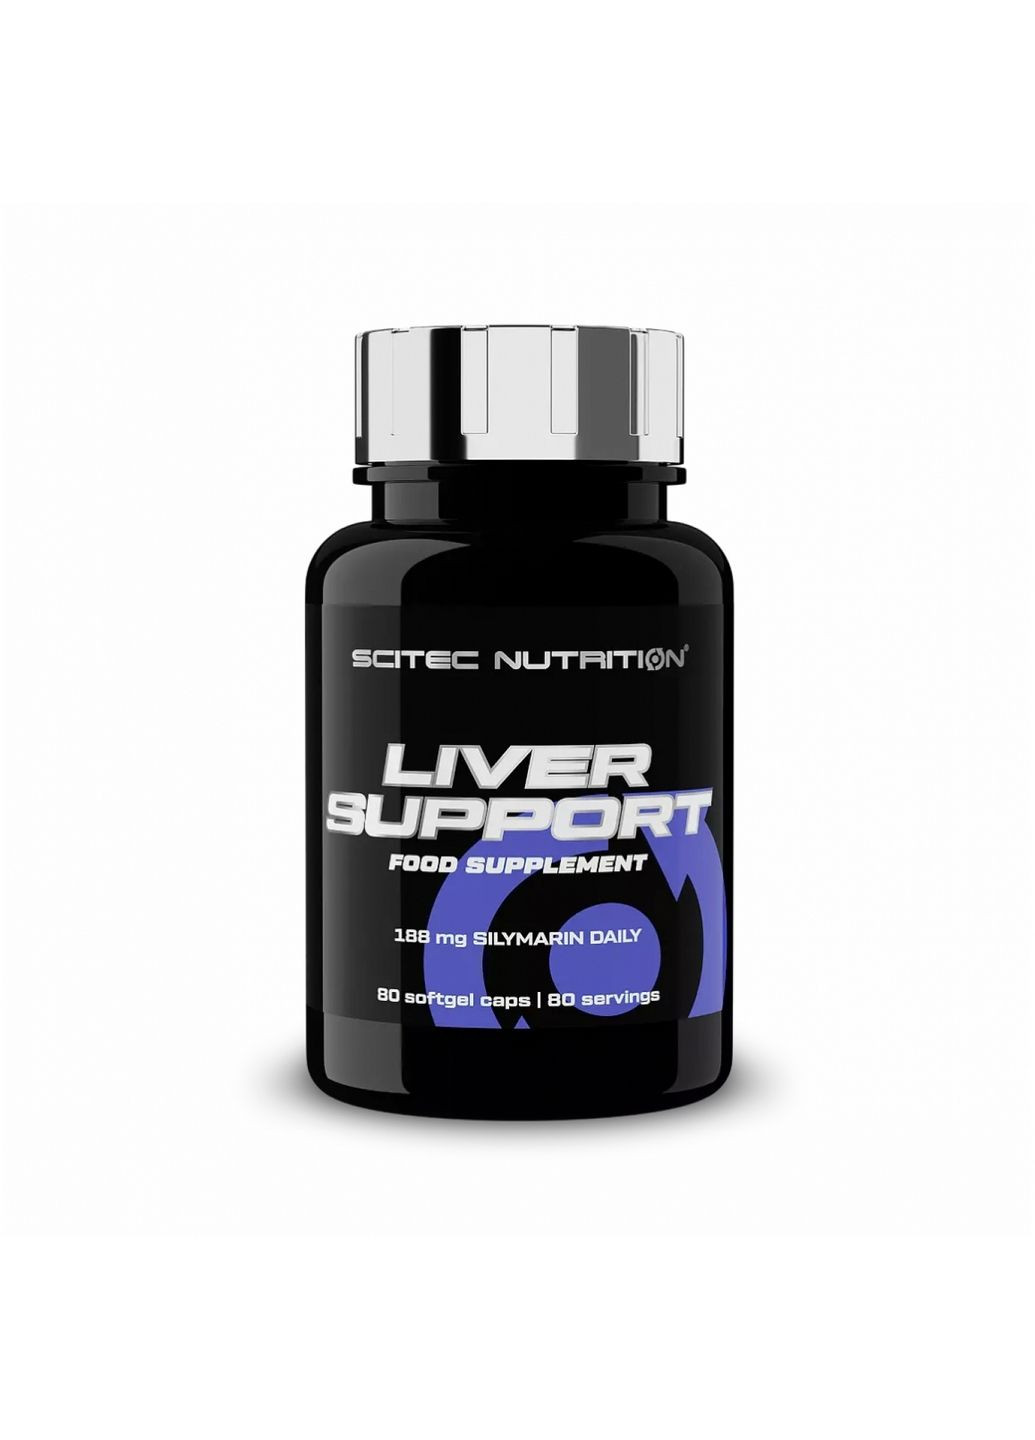 Натуральна добавка Liver Support, 80 капсул Scitec Nutrition (293338276)